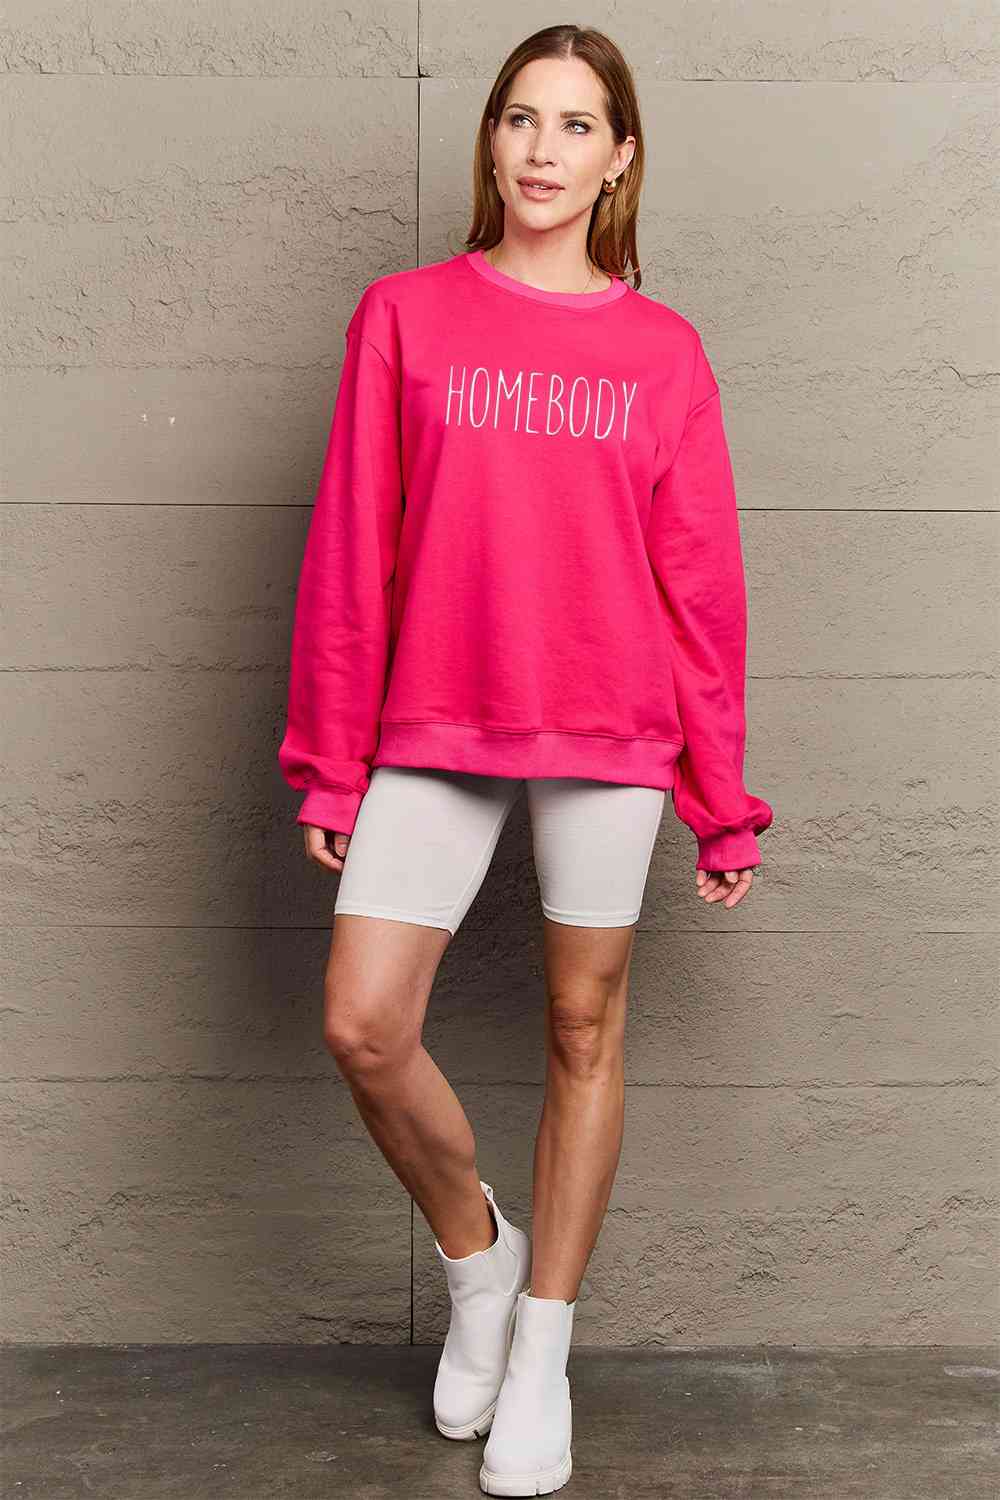 Simply Love Full Size HOMEBODY Graphic Sweatshirt - Happily Ever Atchison Shop Co.